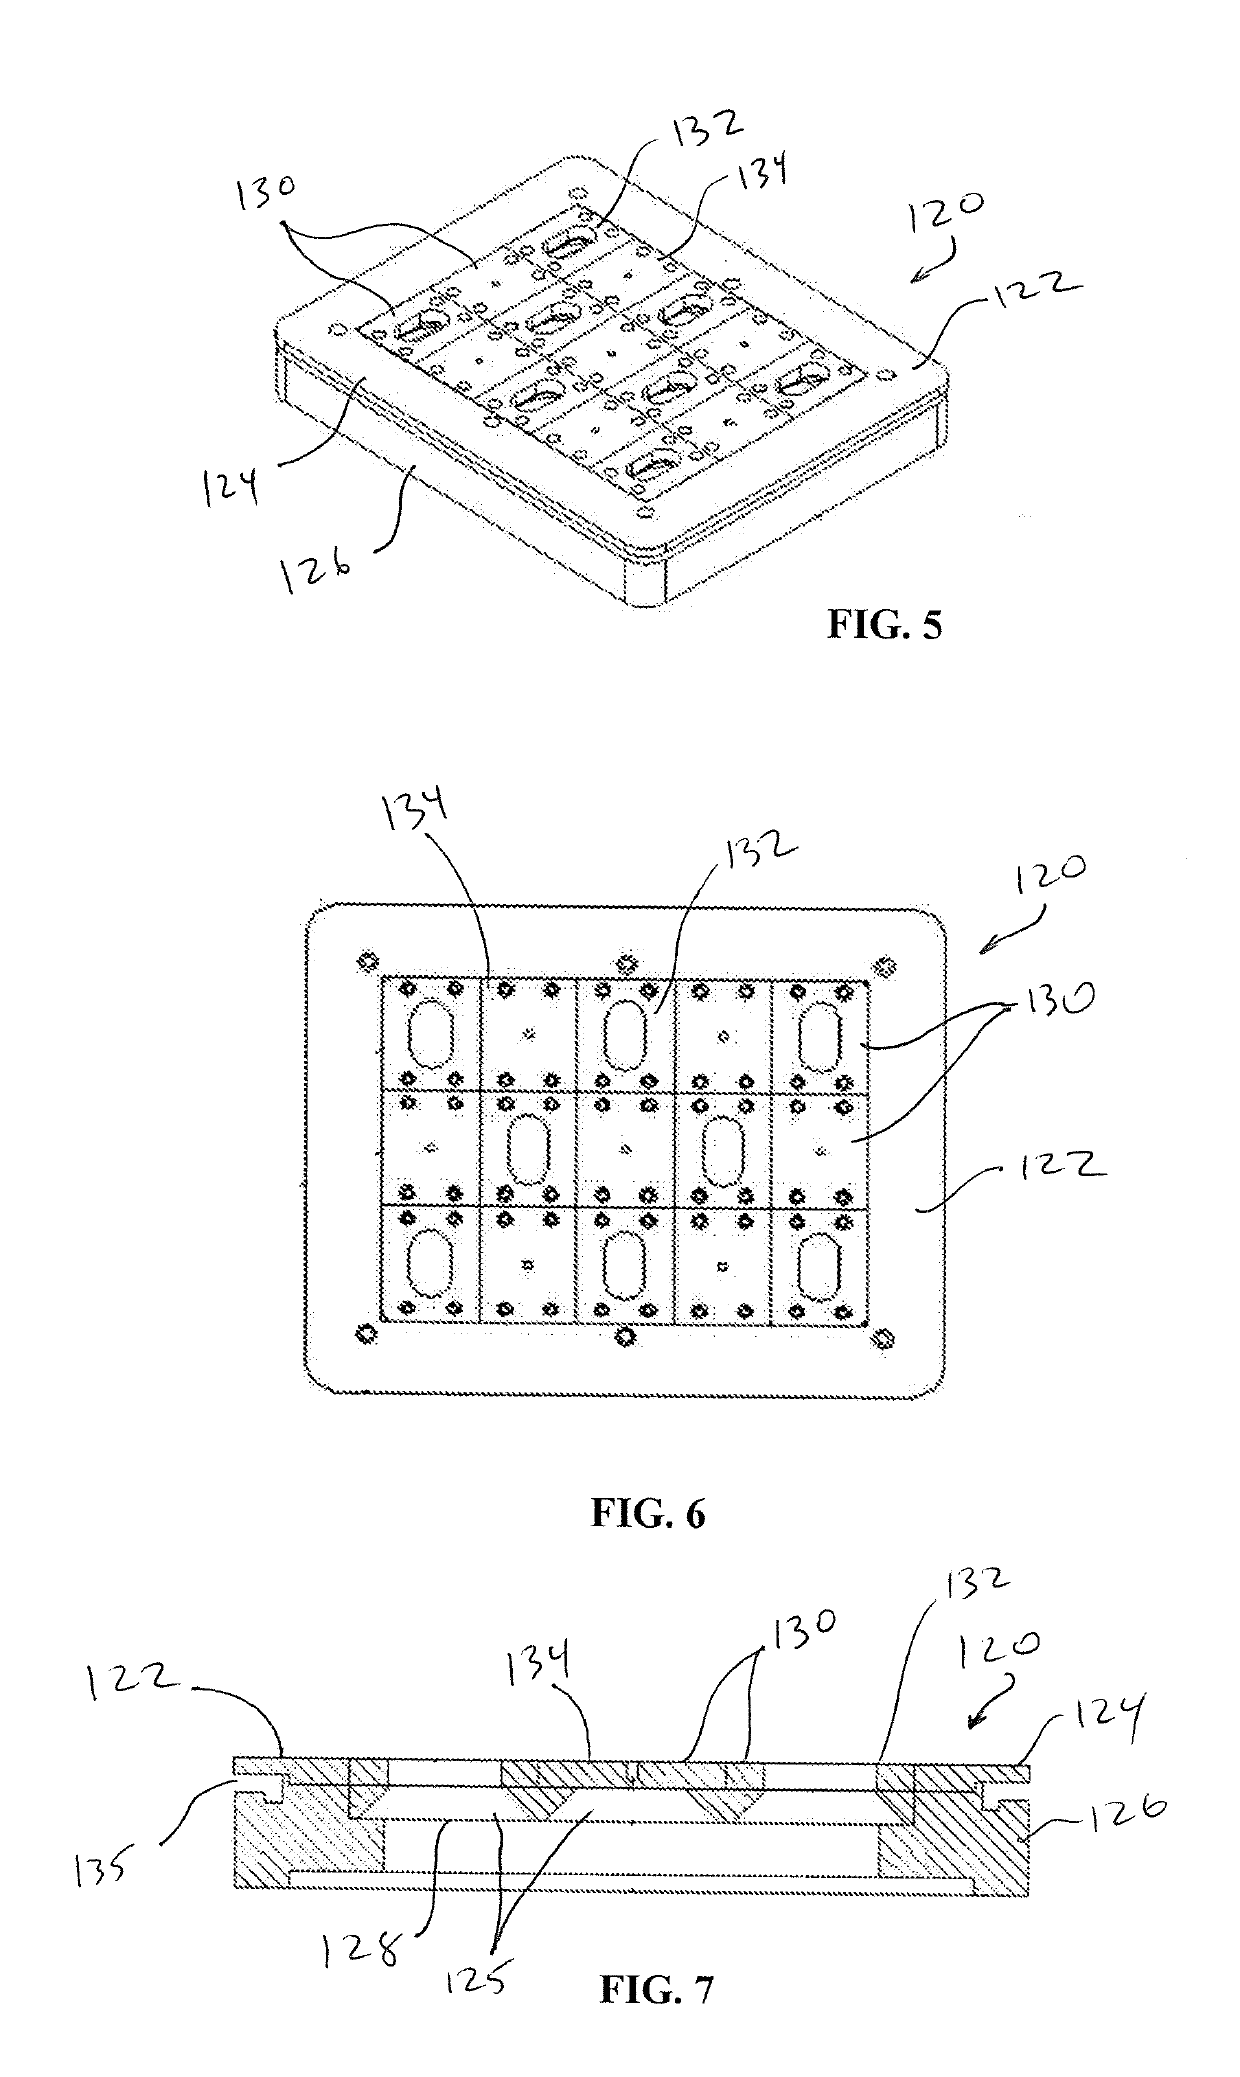 Method and apparatus for forming sand molds via top and bottom pneumatic sand filling perpendicular to the pattern plate